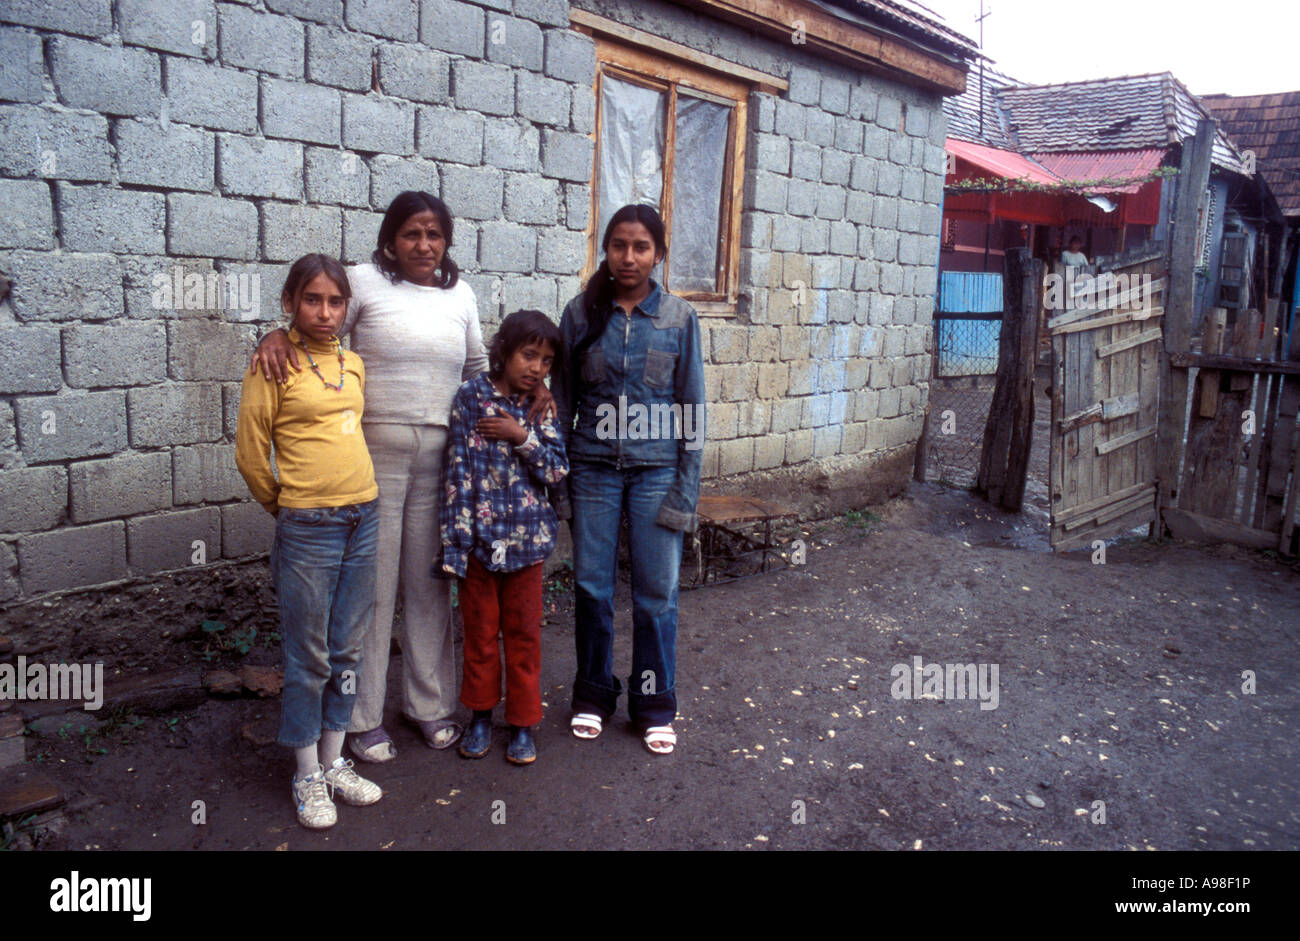 Mother and three daughters posing outside block house in Transylvanian Gypsy village of Soard. Stock Photo